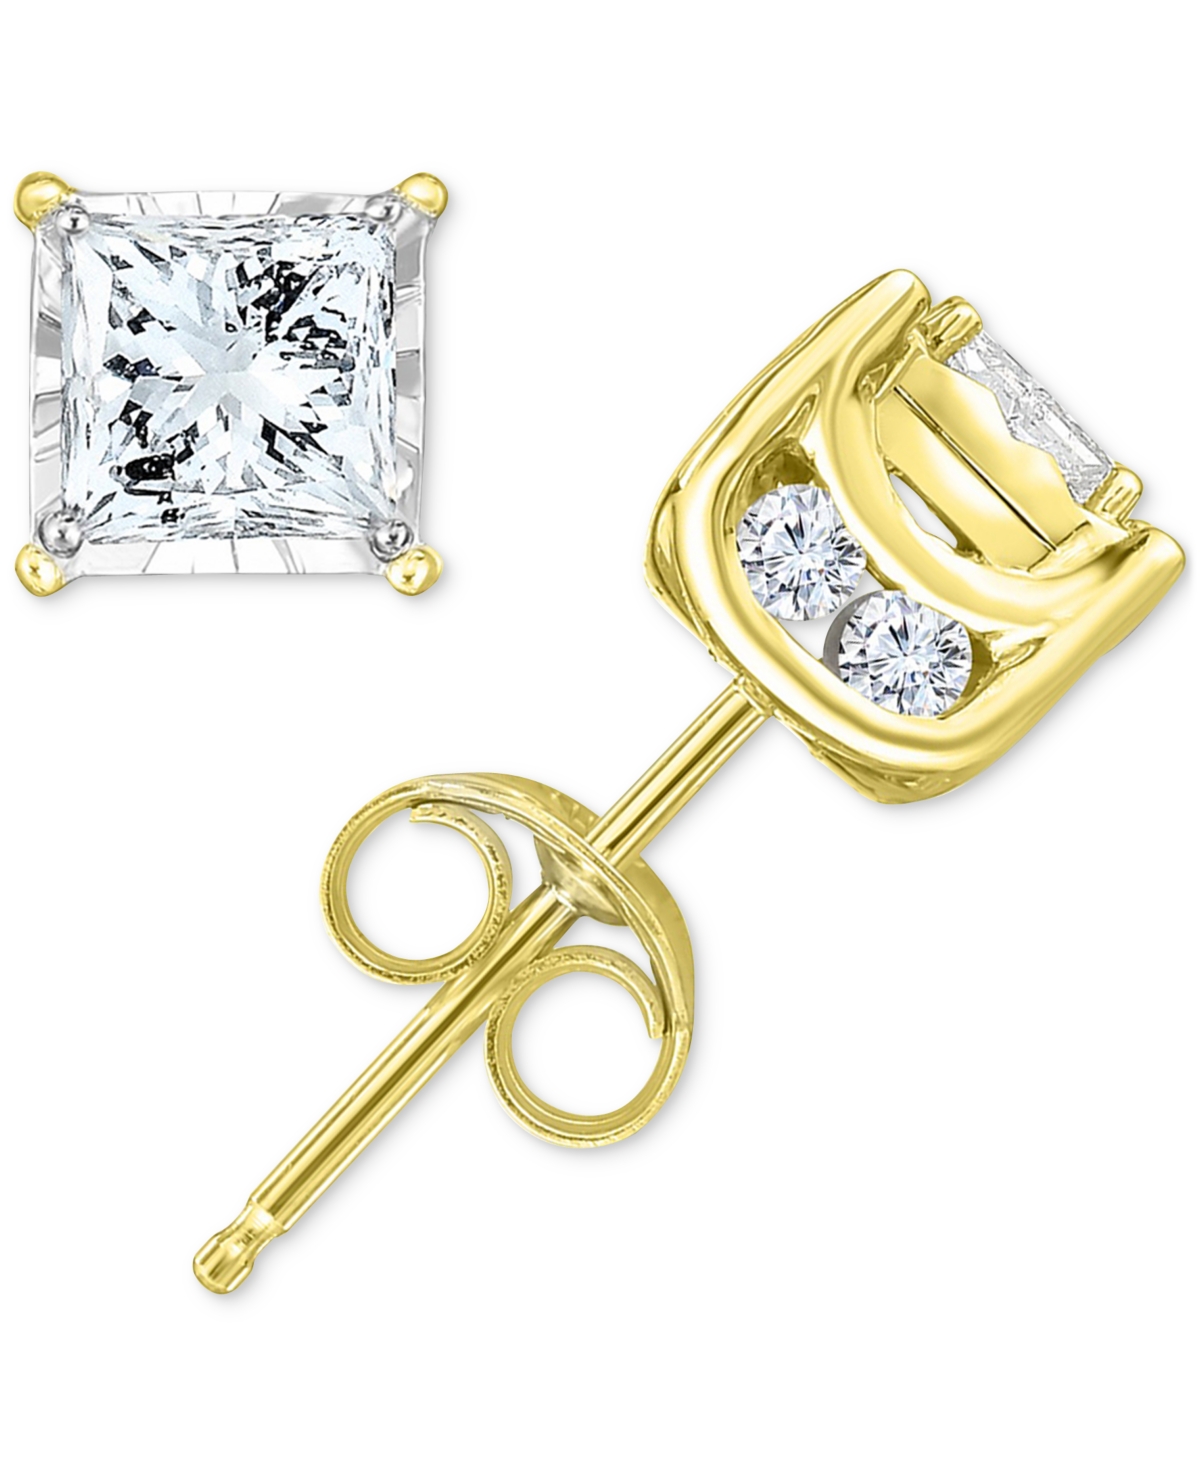 Diamond Princess Stud Earrings (3/4 ct. t.w.) in 14k White Gold, Gold or Rose Gold - Rose Gold